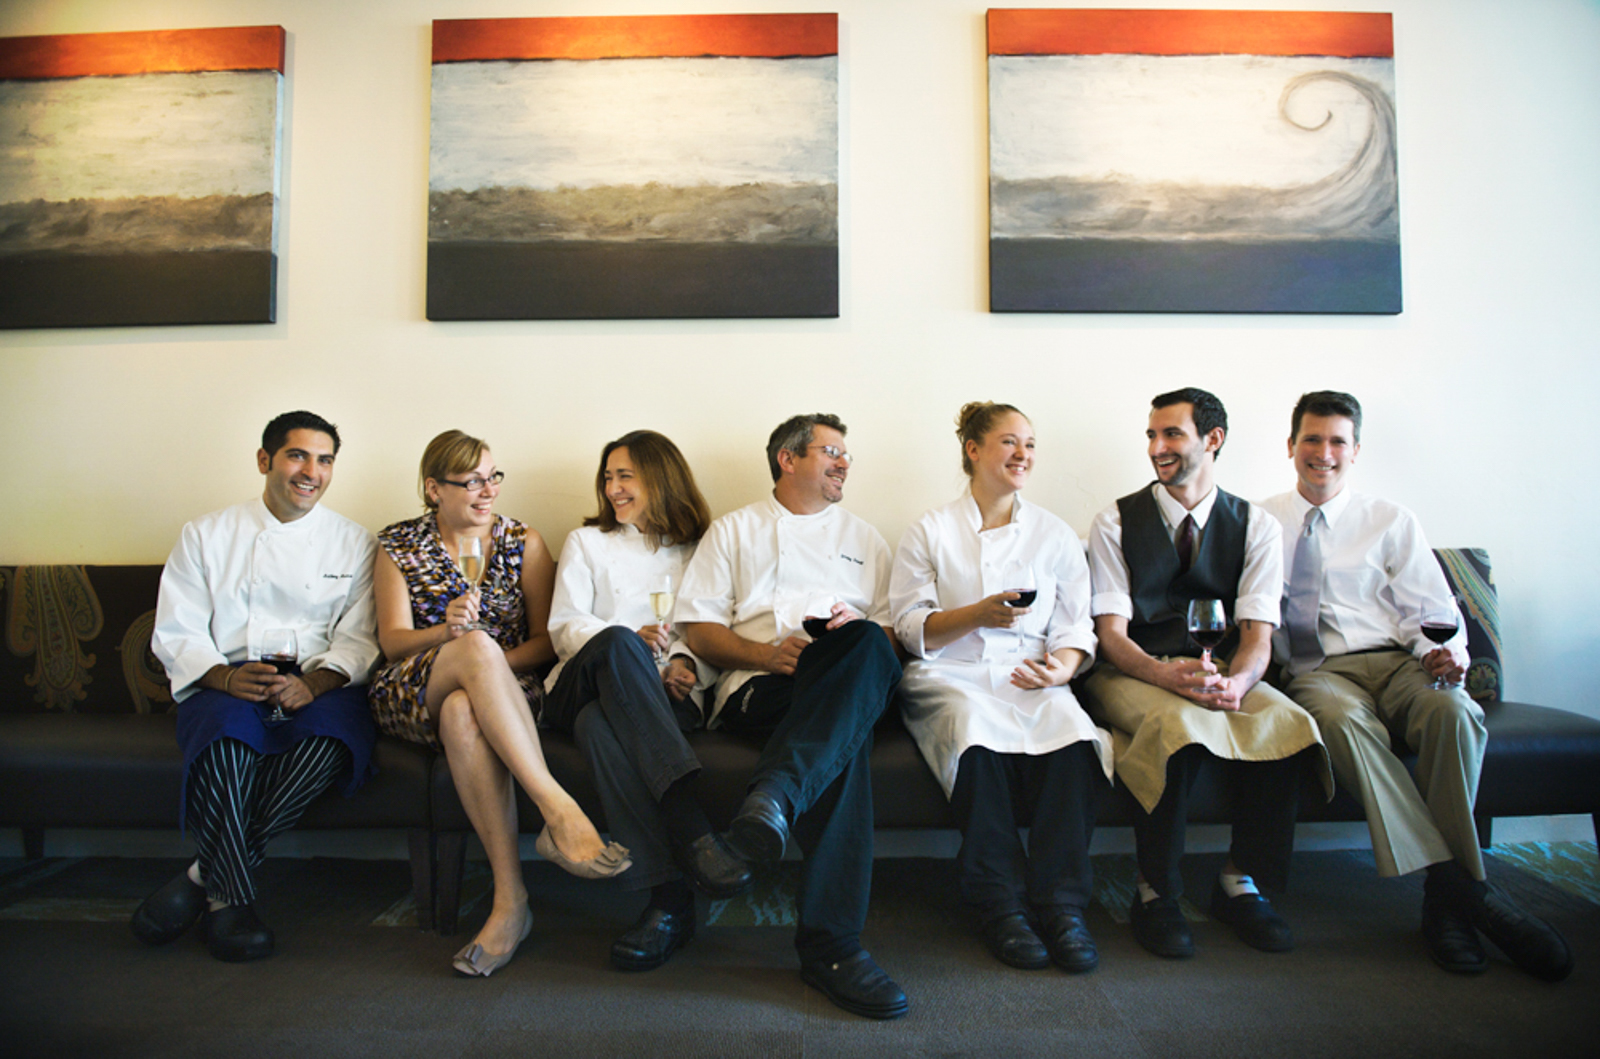 Group of chefs sitting in a couch smiling with artwork